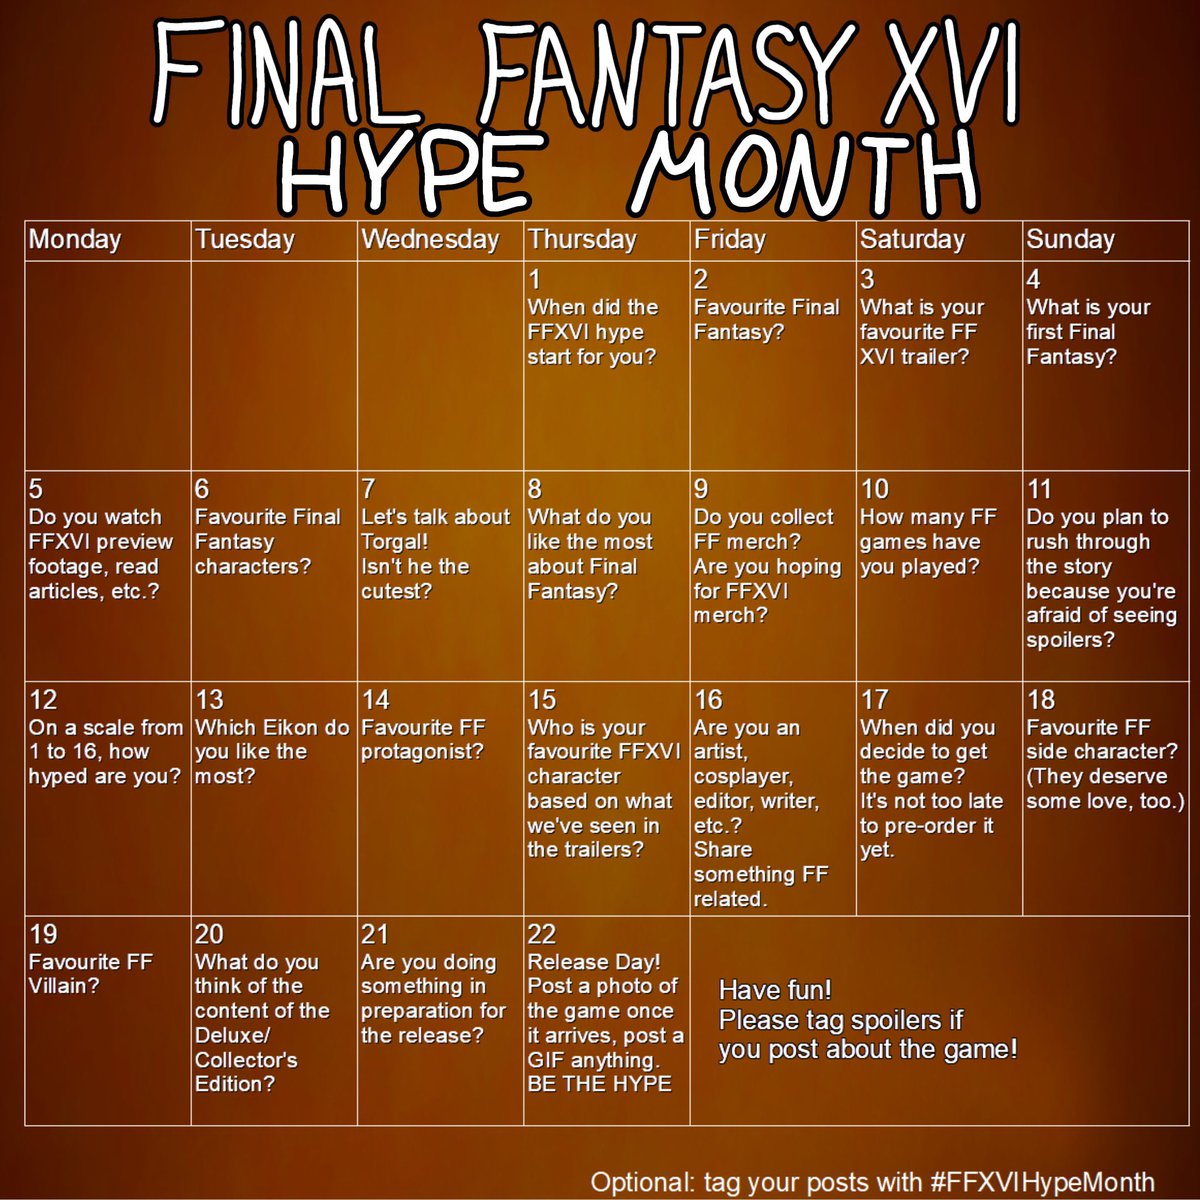 2. Favorite Final Fantasy?

For over twenty years, the answer to this question has been FFVI. To be honest, it still is for many reasons. But I’m not kidding when I say FFXIV has been making me reconsider how I answer this question.